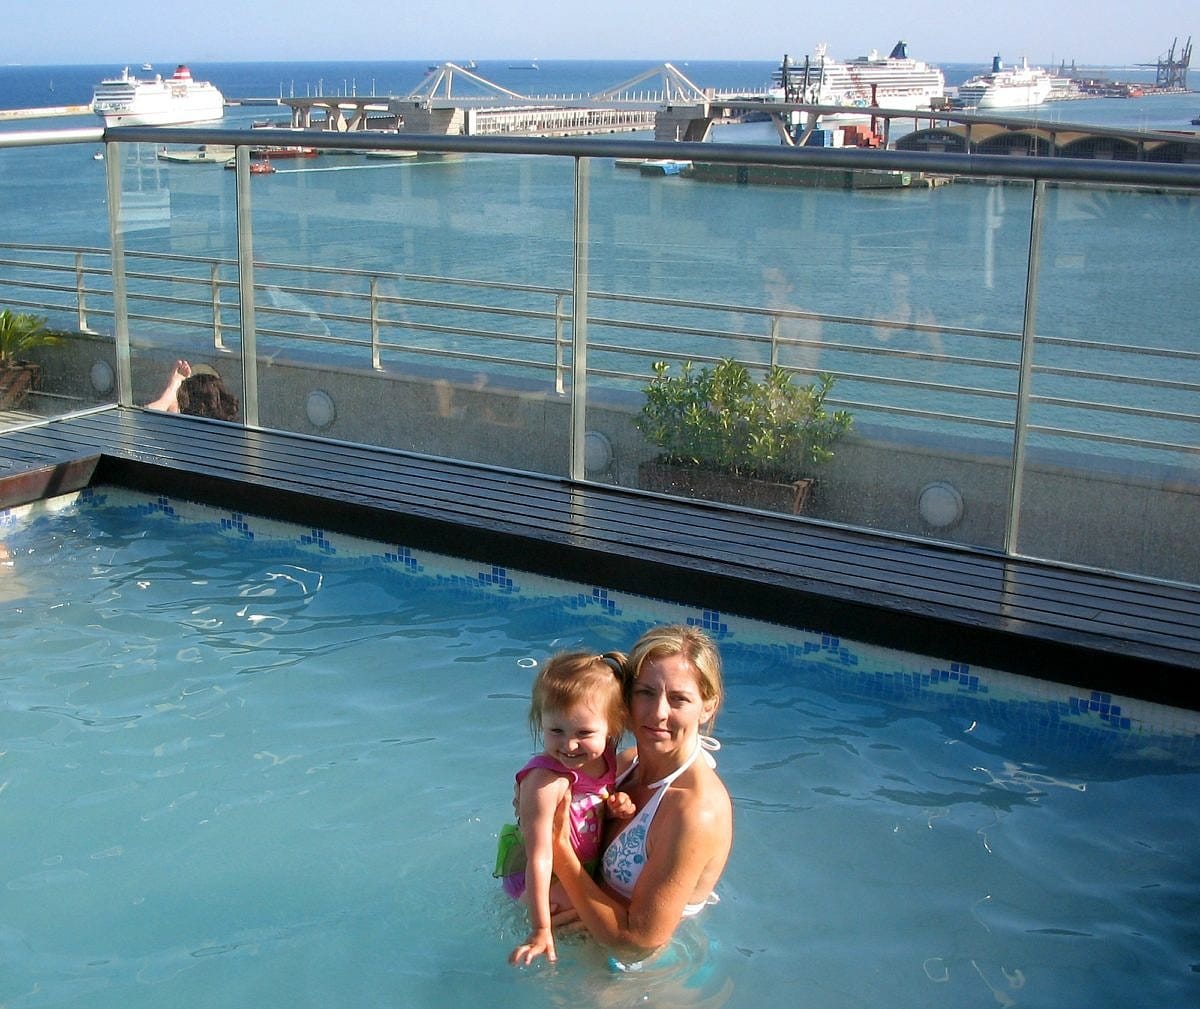 The rooftop pool at the Grand Marina Hotel in Barcelona with kids